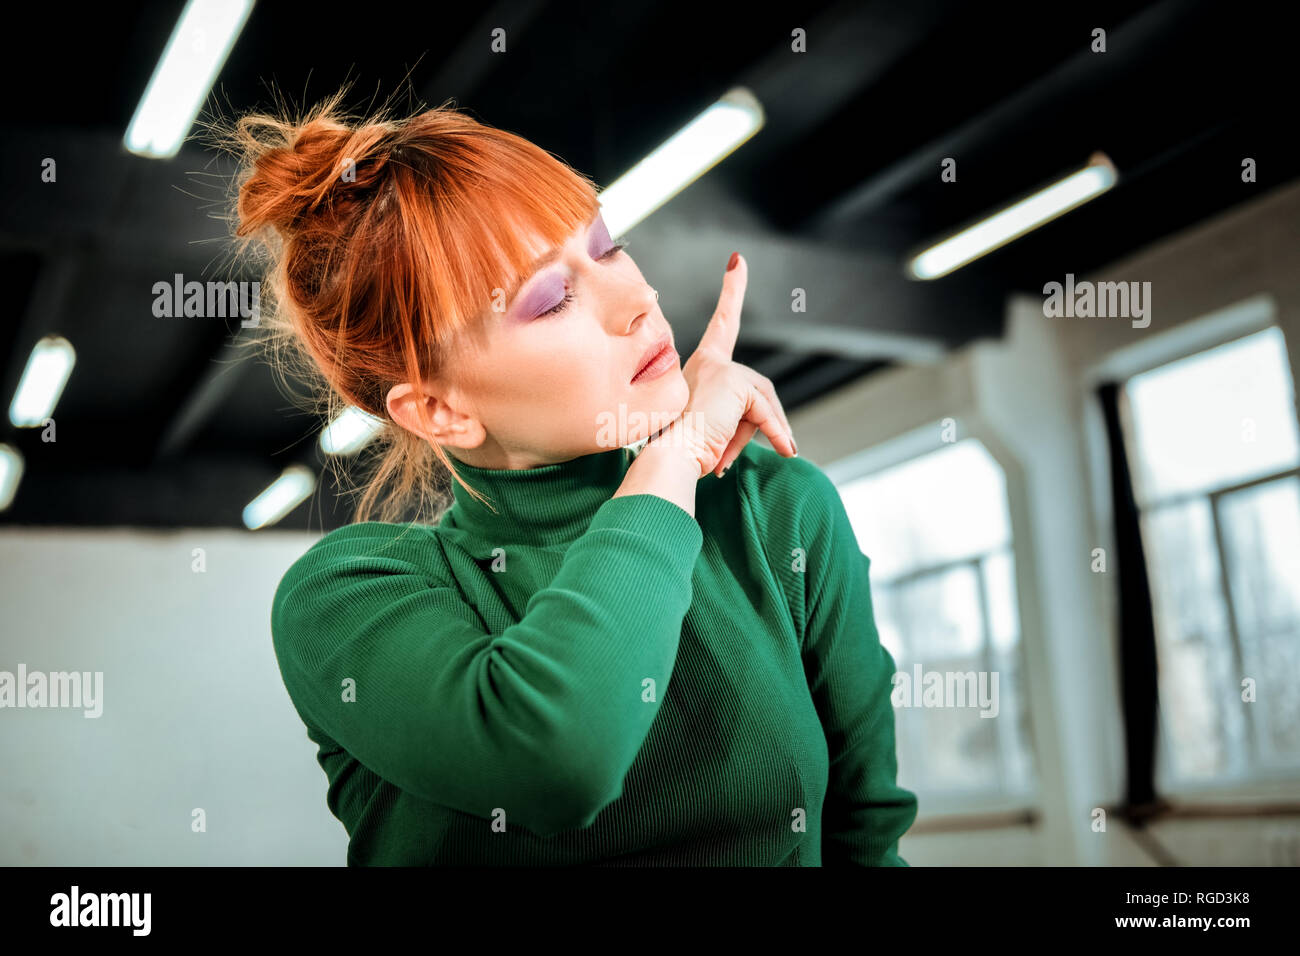 Red-haired professional choreographer with hair bun feeling relaxed Stock Photo